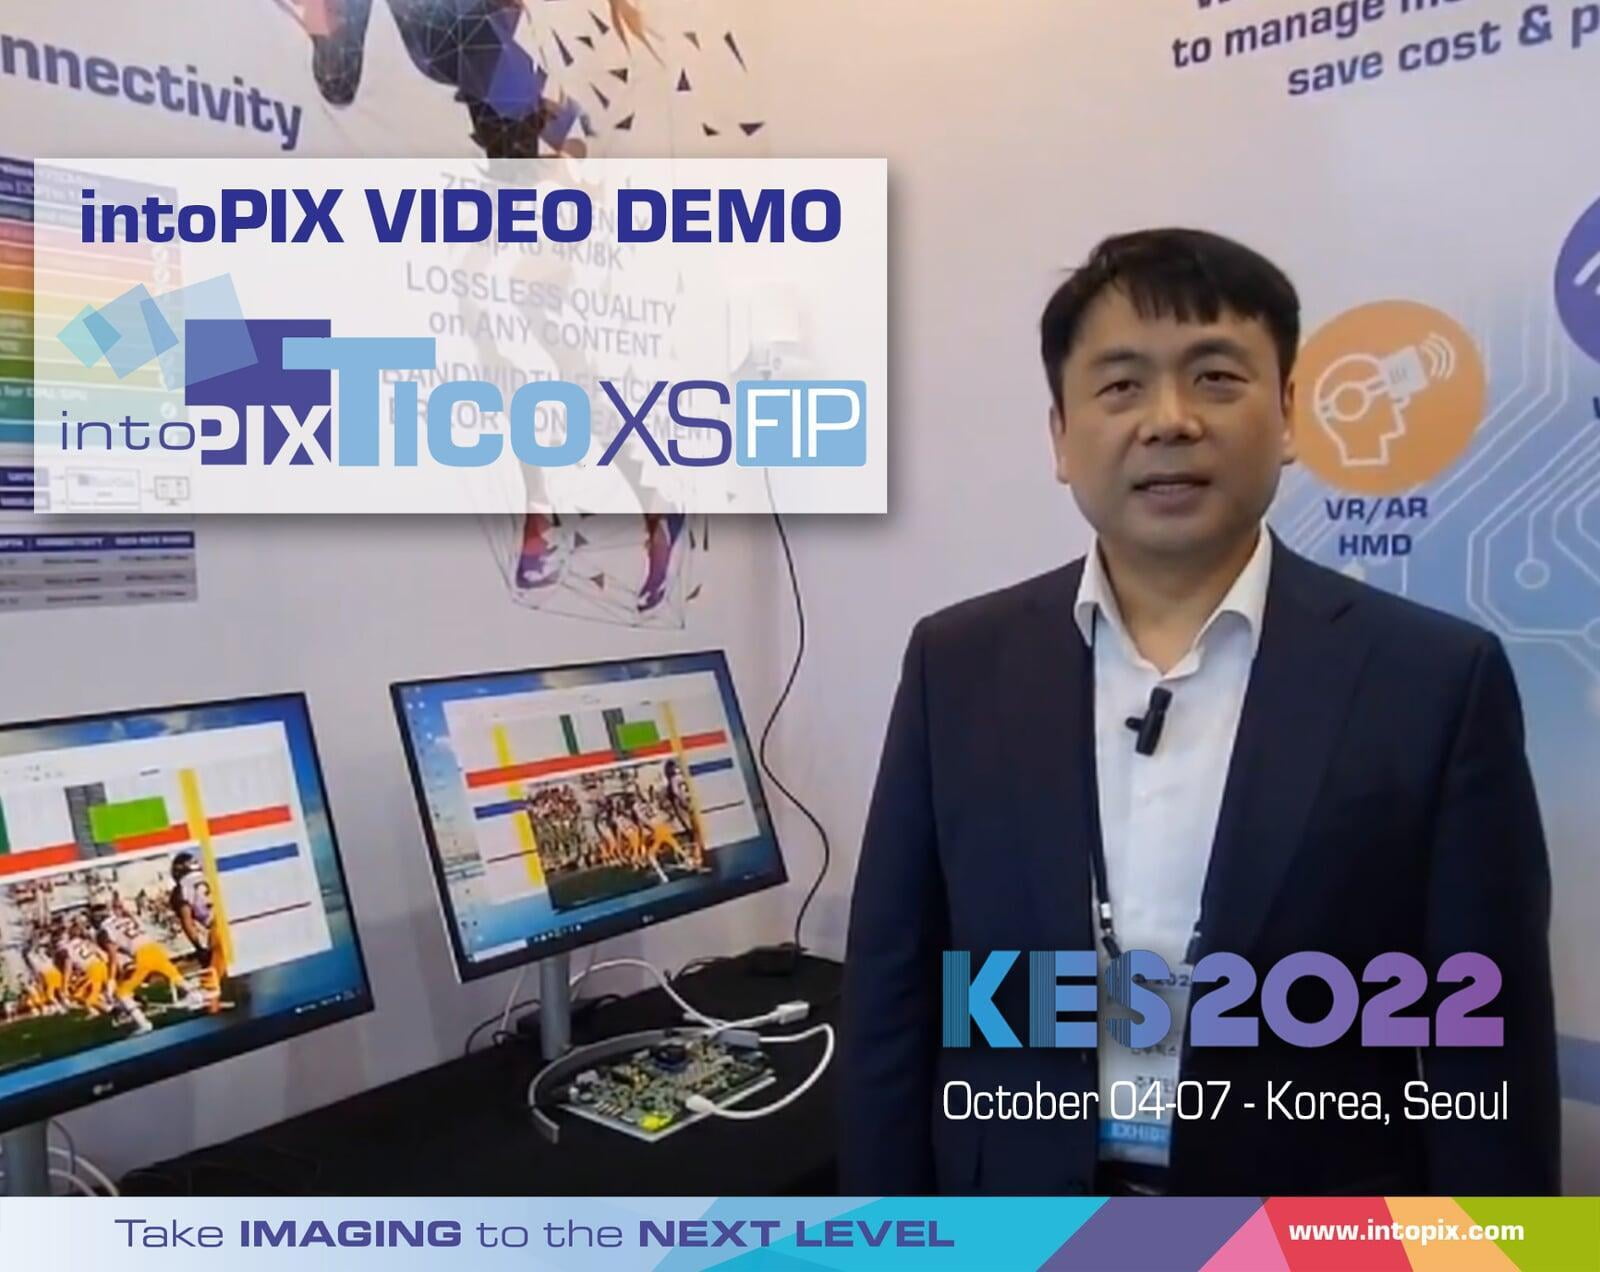 Korean Video Demo from KES2022 : Presentation of the new intoPIX TicoXS FIP for wireless transmission